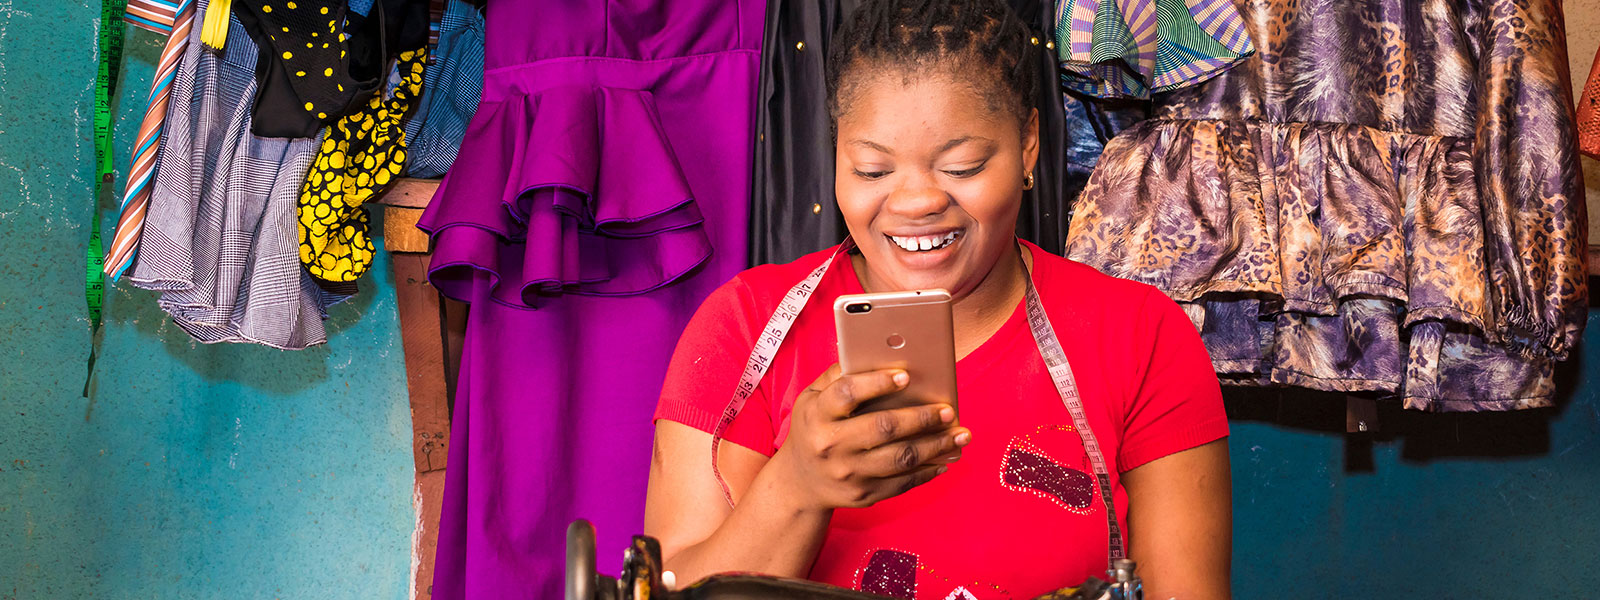 Microsoft, WOCCU support SACCOs with digital solutions to improve SME lending in Kenya